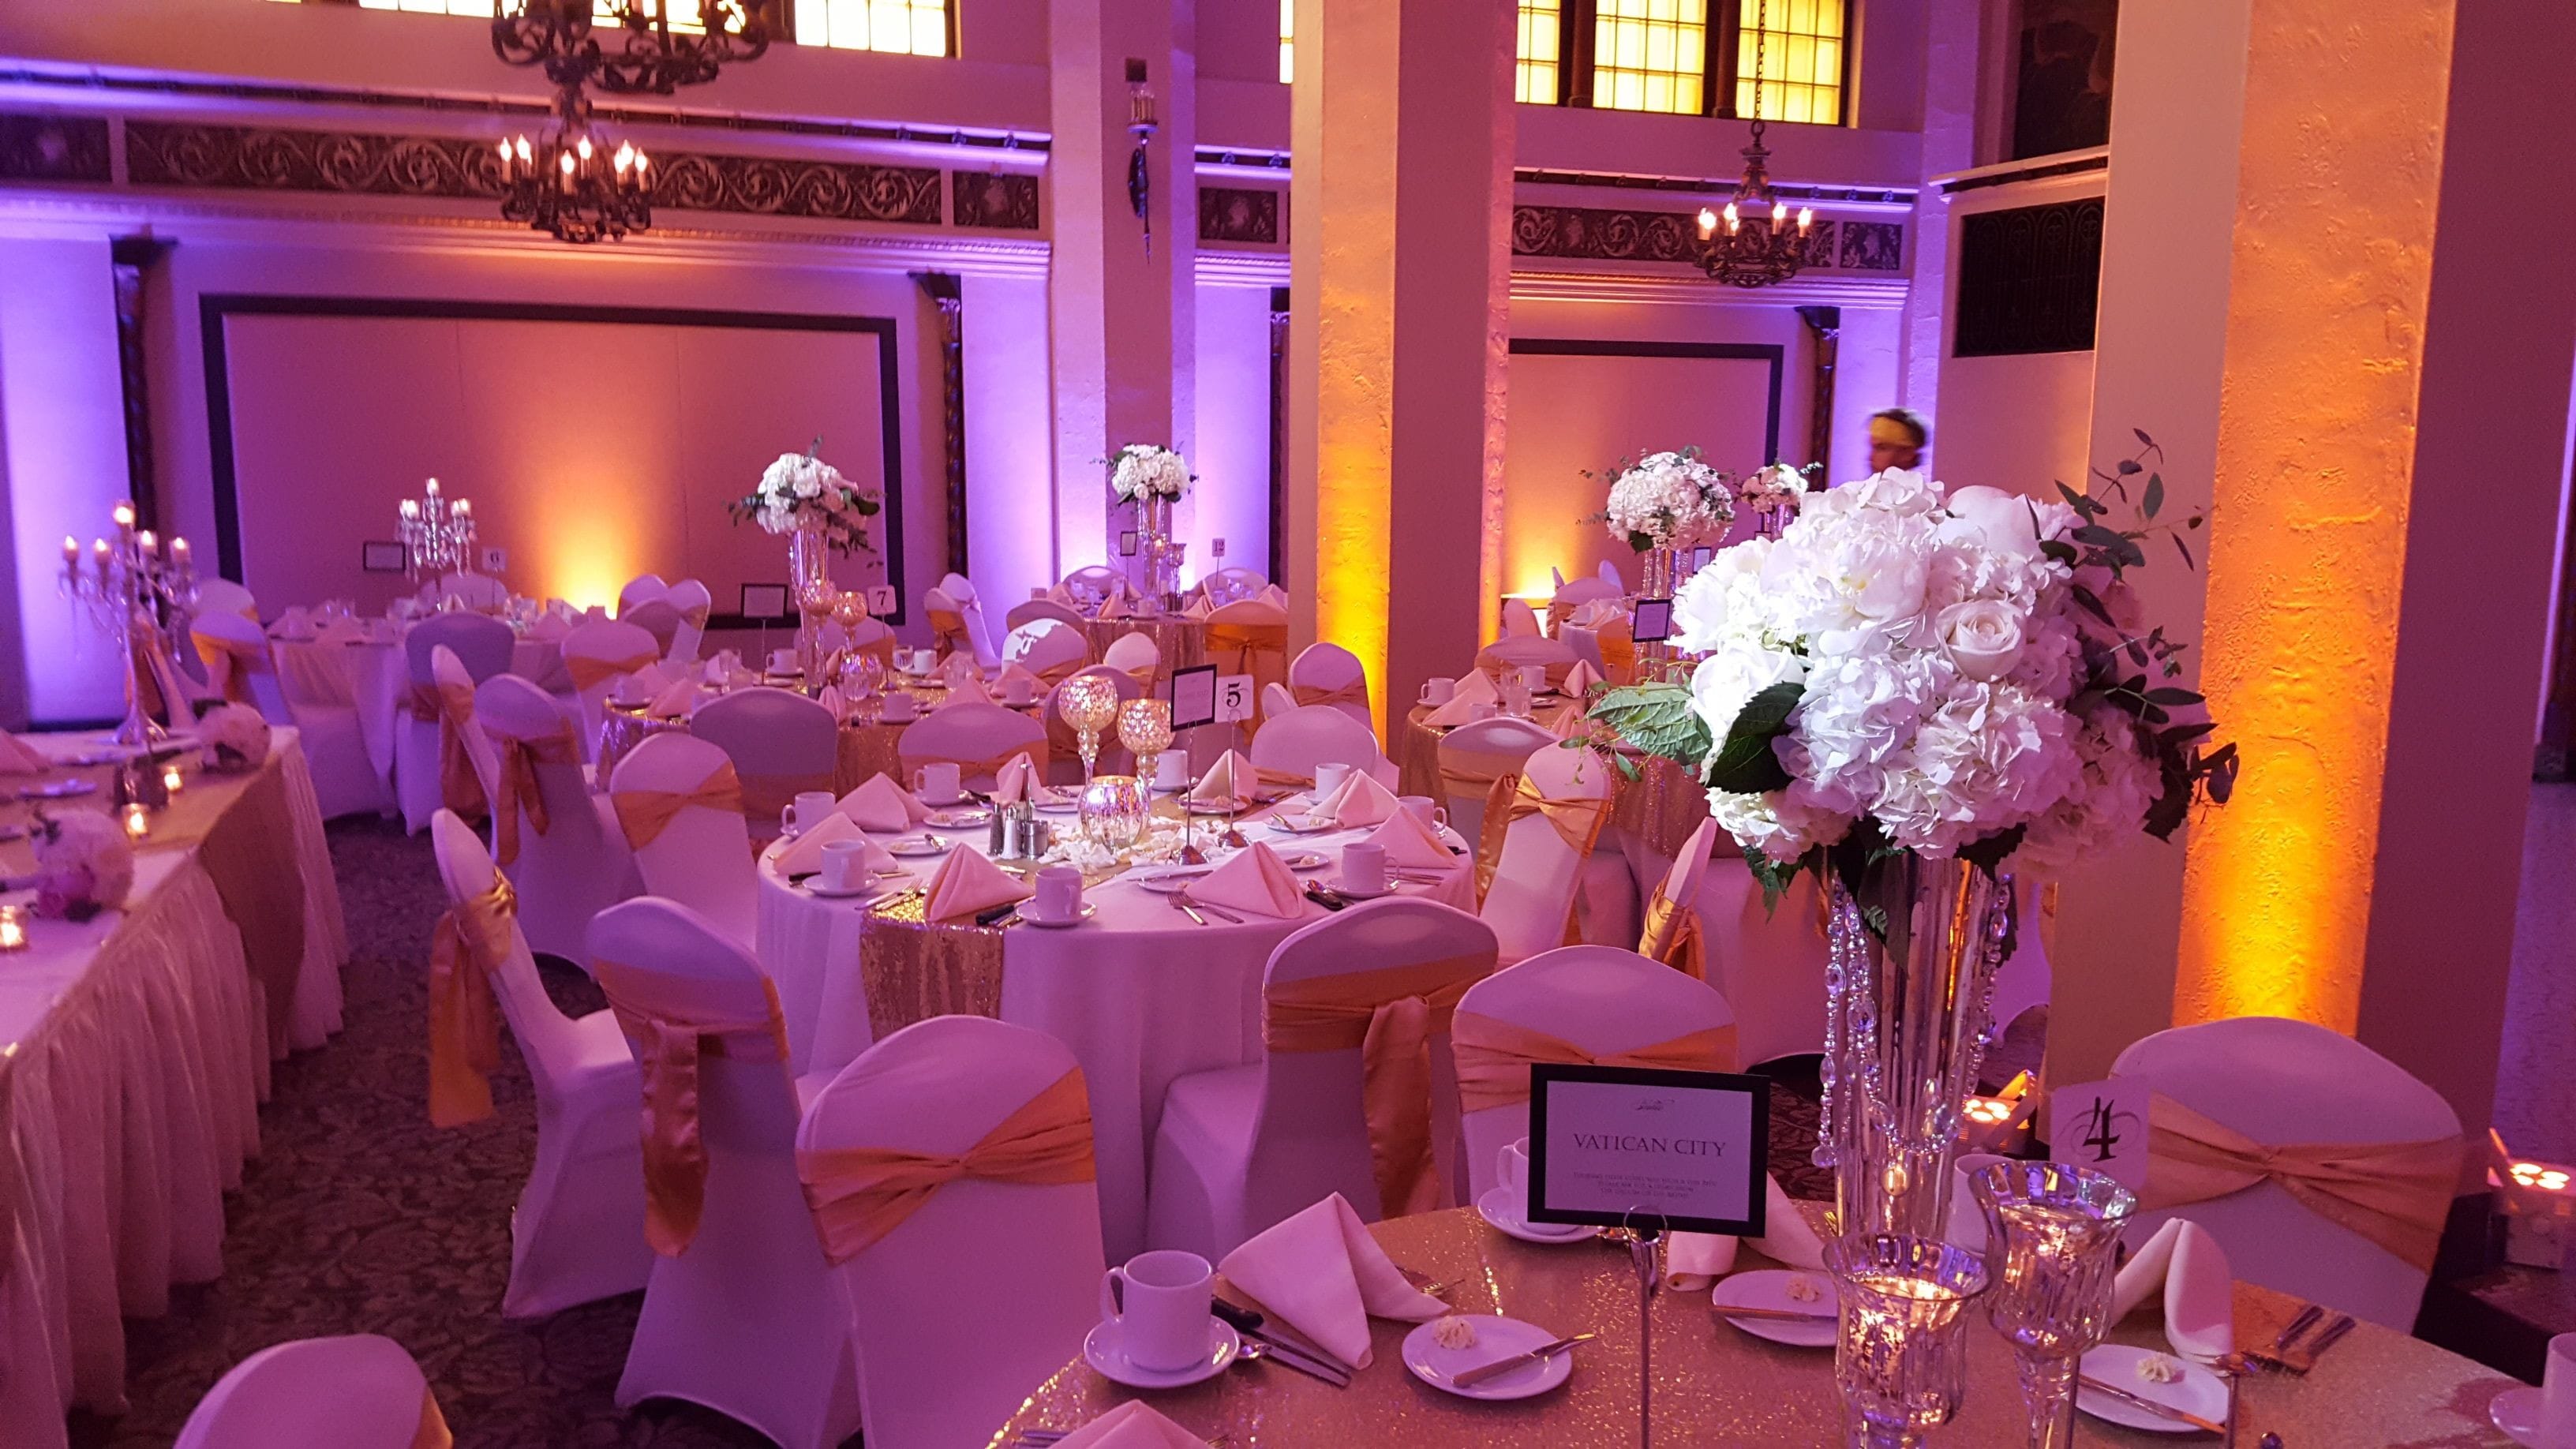 Moorish Room wedding.Up lighting in lavender and amber. Pin spots on flowers.